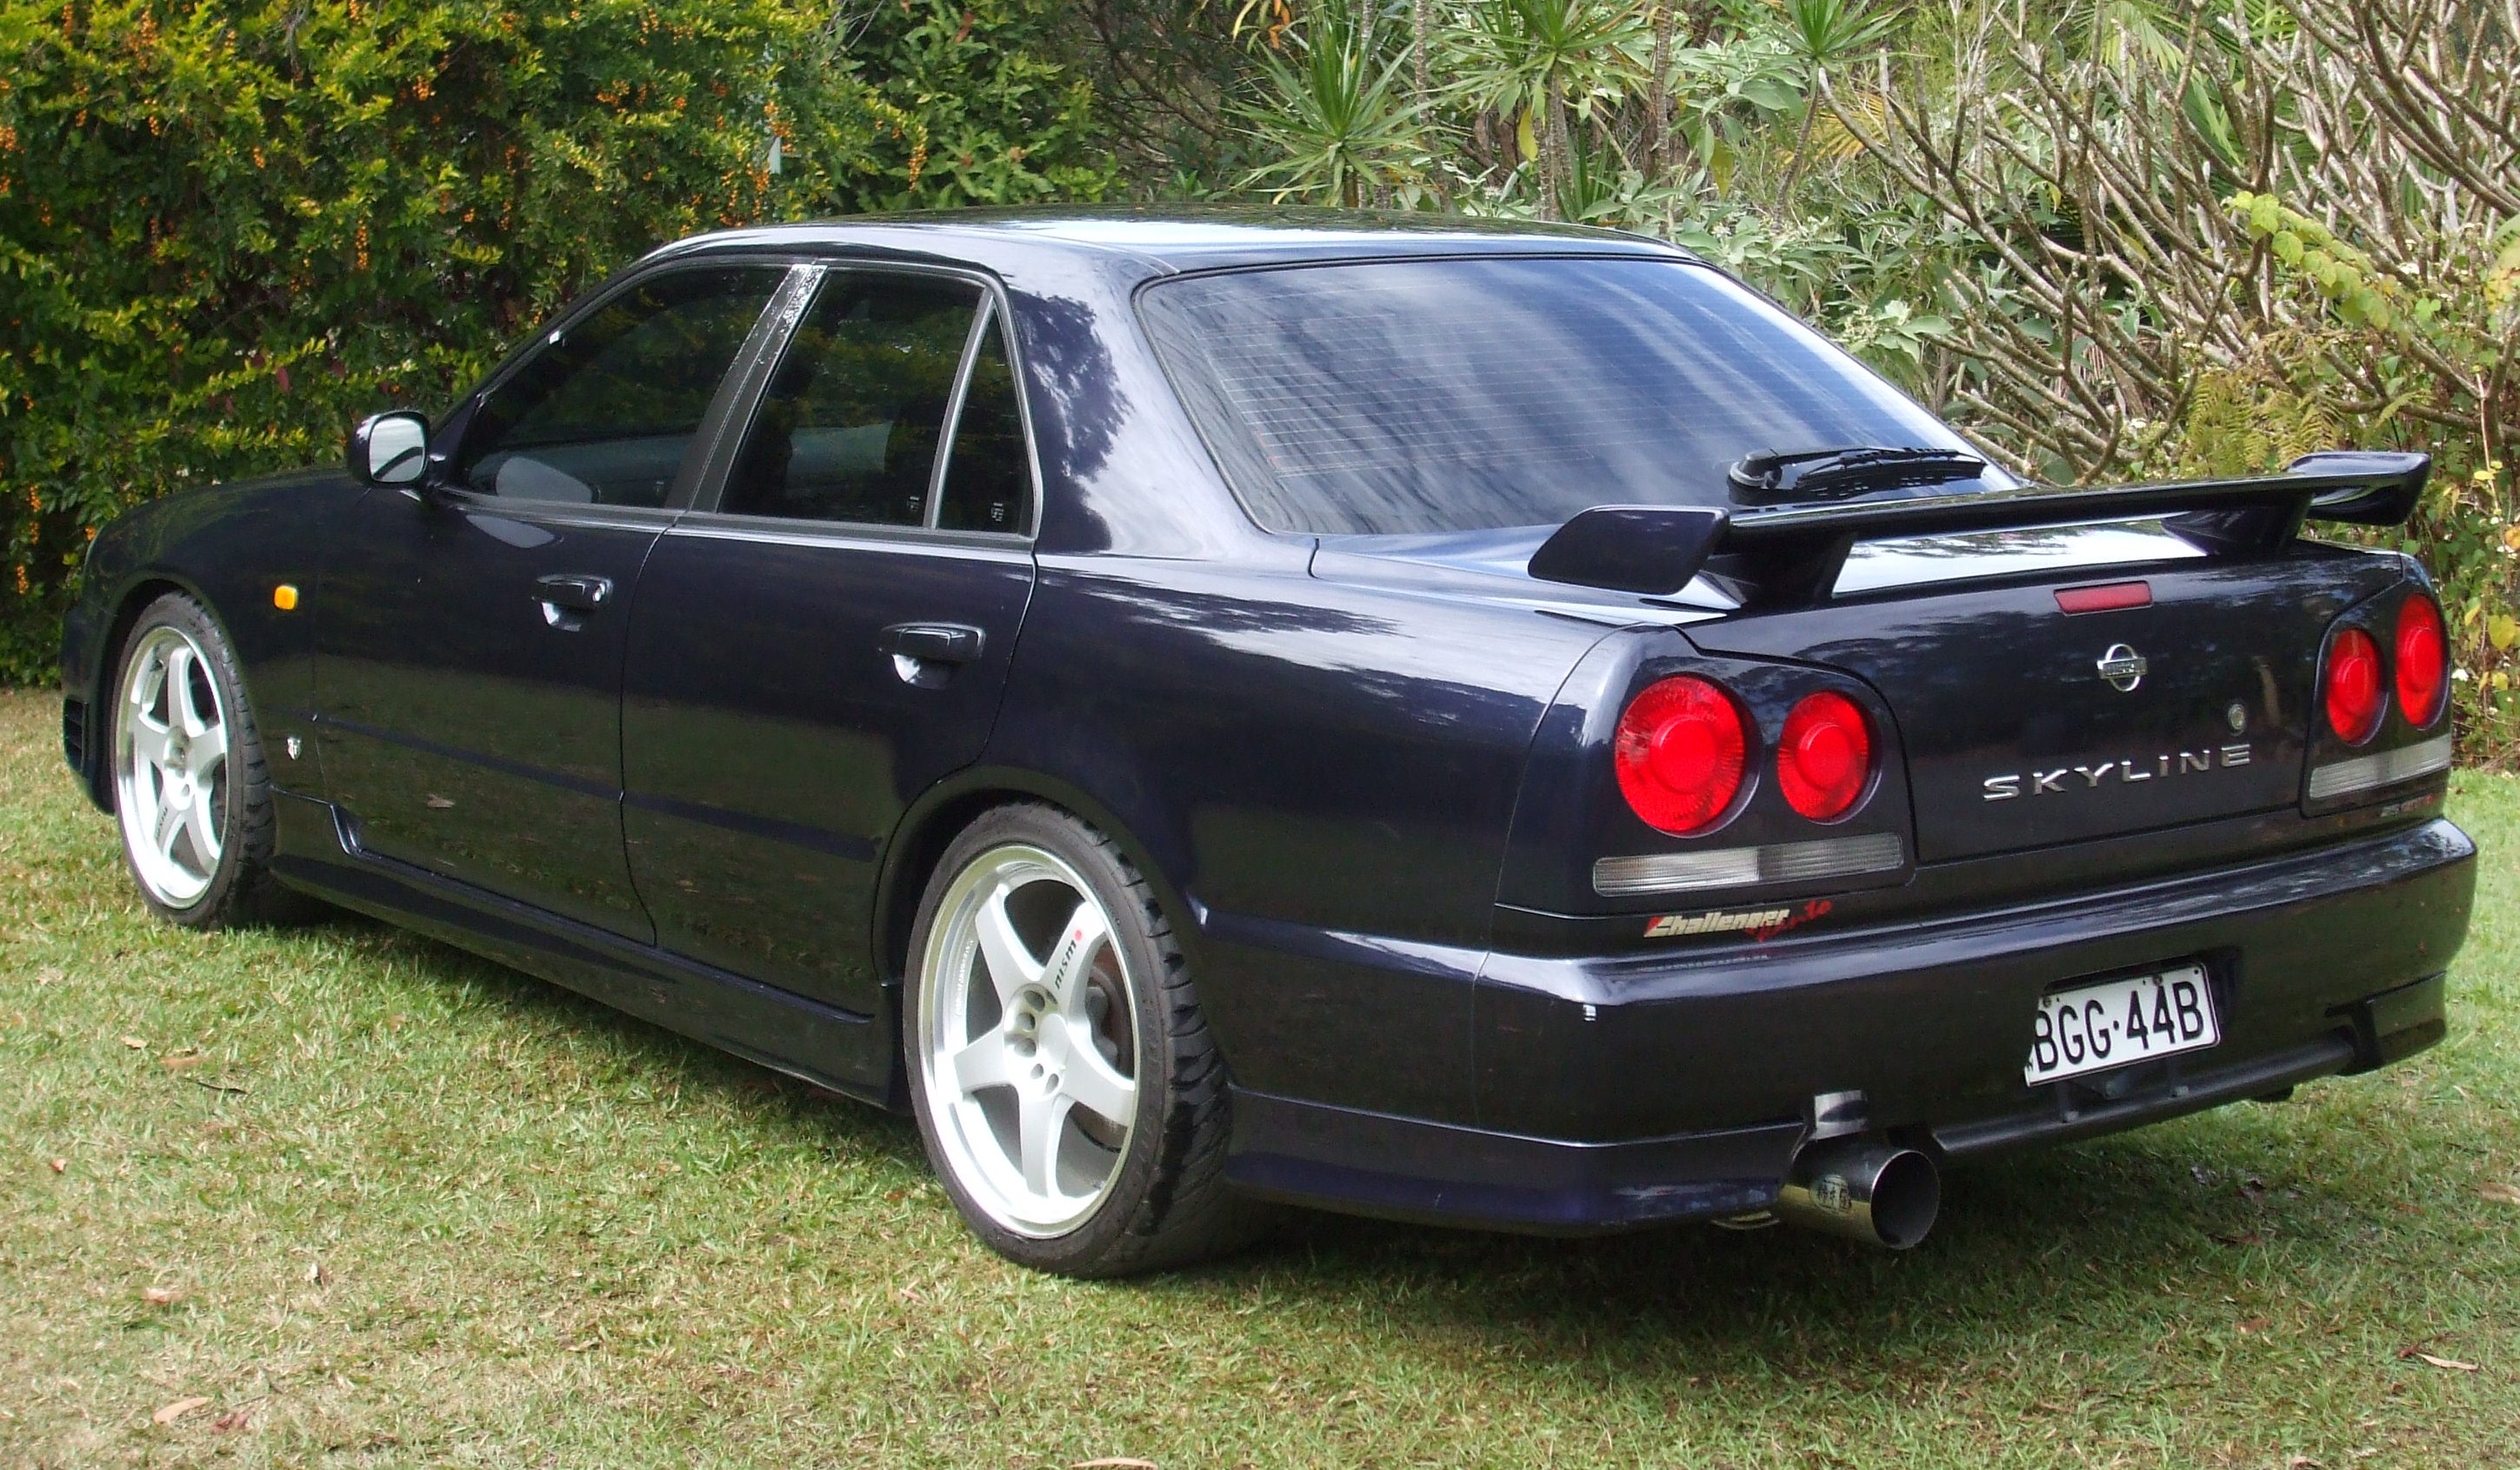 R34 Gtt Turbo 4door Manual For Sale Private Whole Cars Only